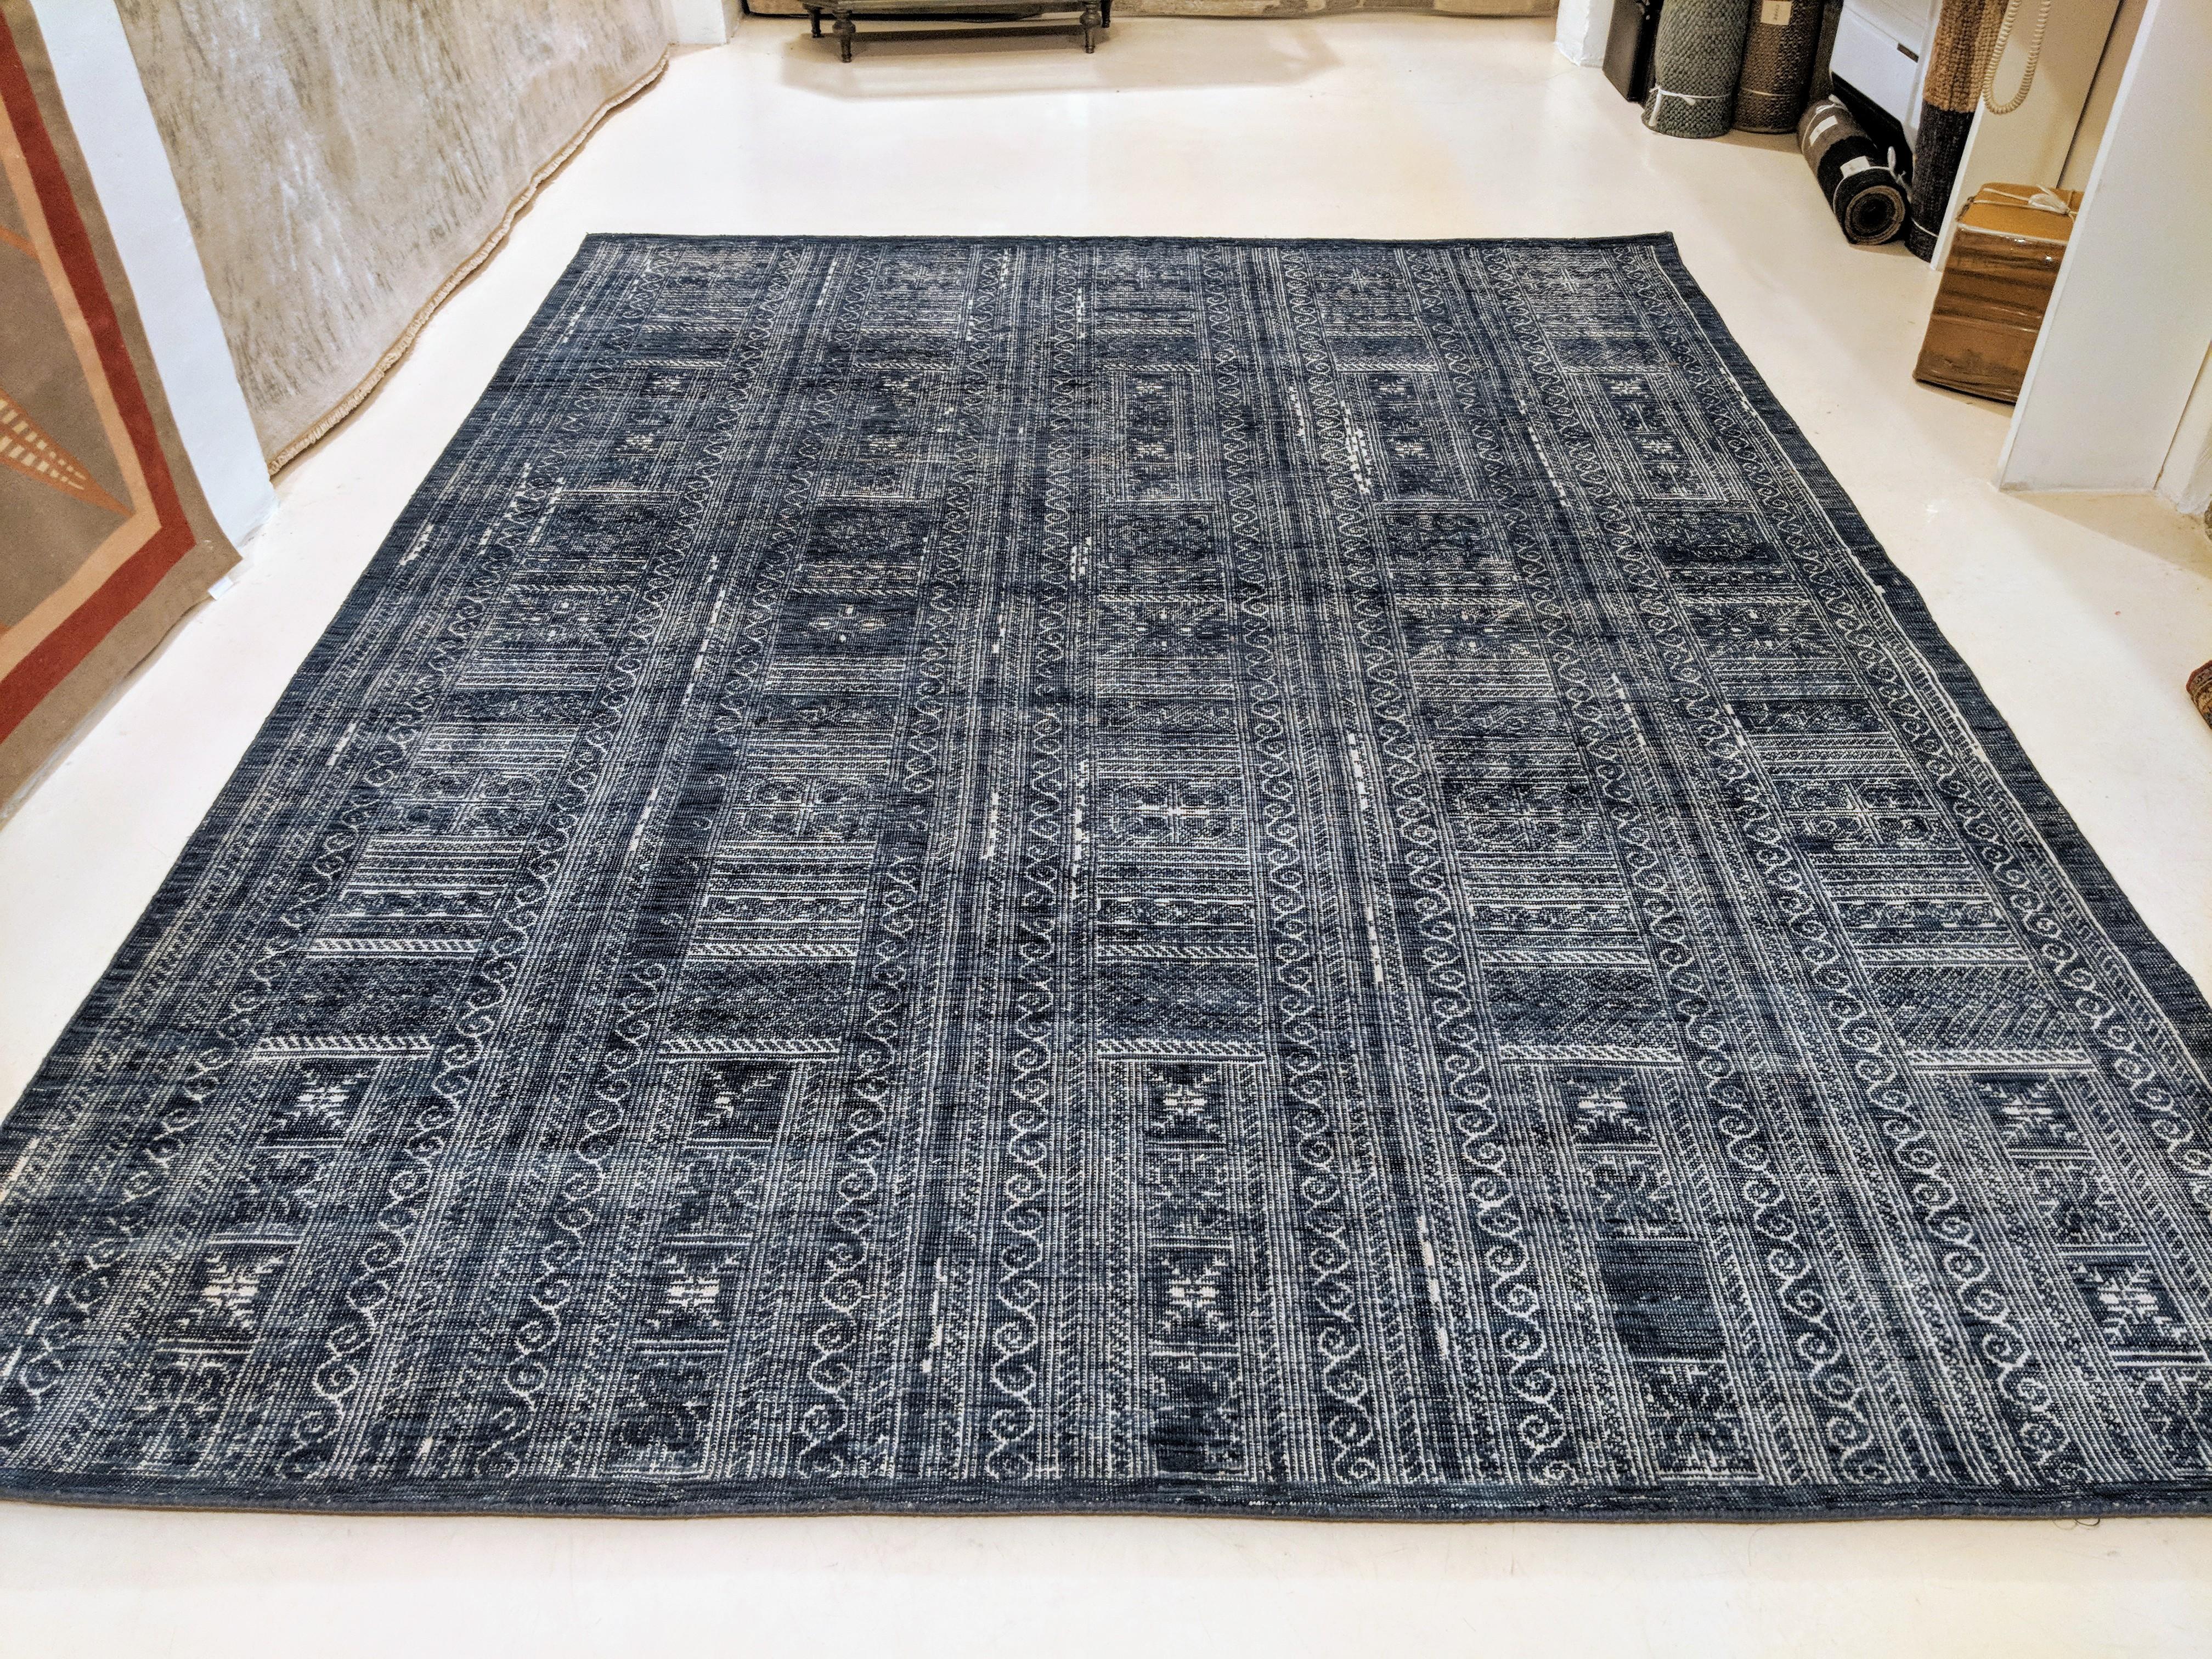 Inspired by ancient Byzantine mosaics, this rug is distinguished by an infinite repeat geometric pattern composed of intricately drawn ivory elements on a denim blue background. The carpet's pile is sheared quite low in order to adequately mimic the